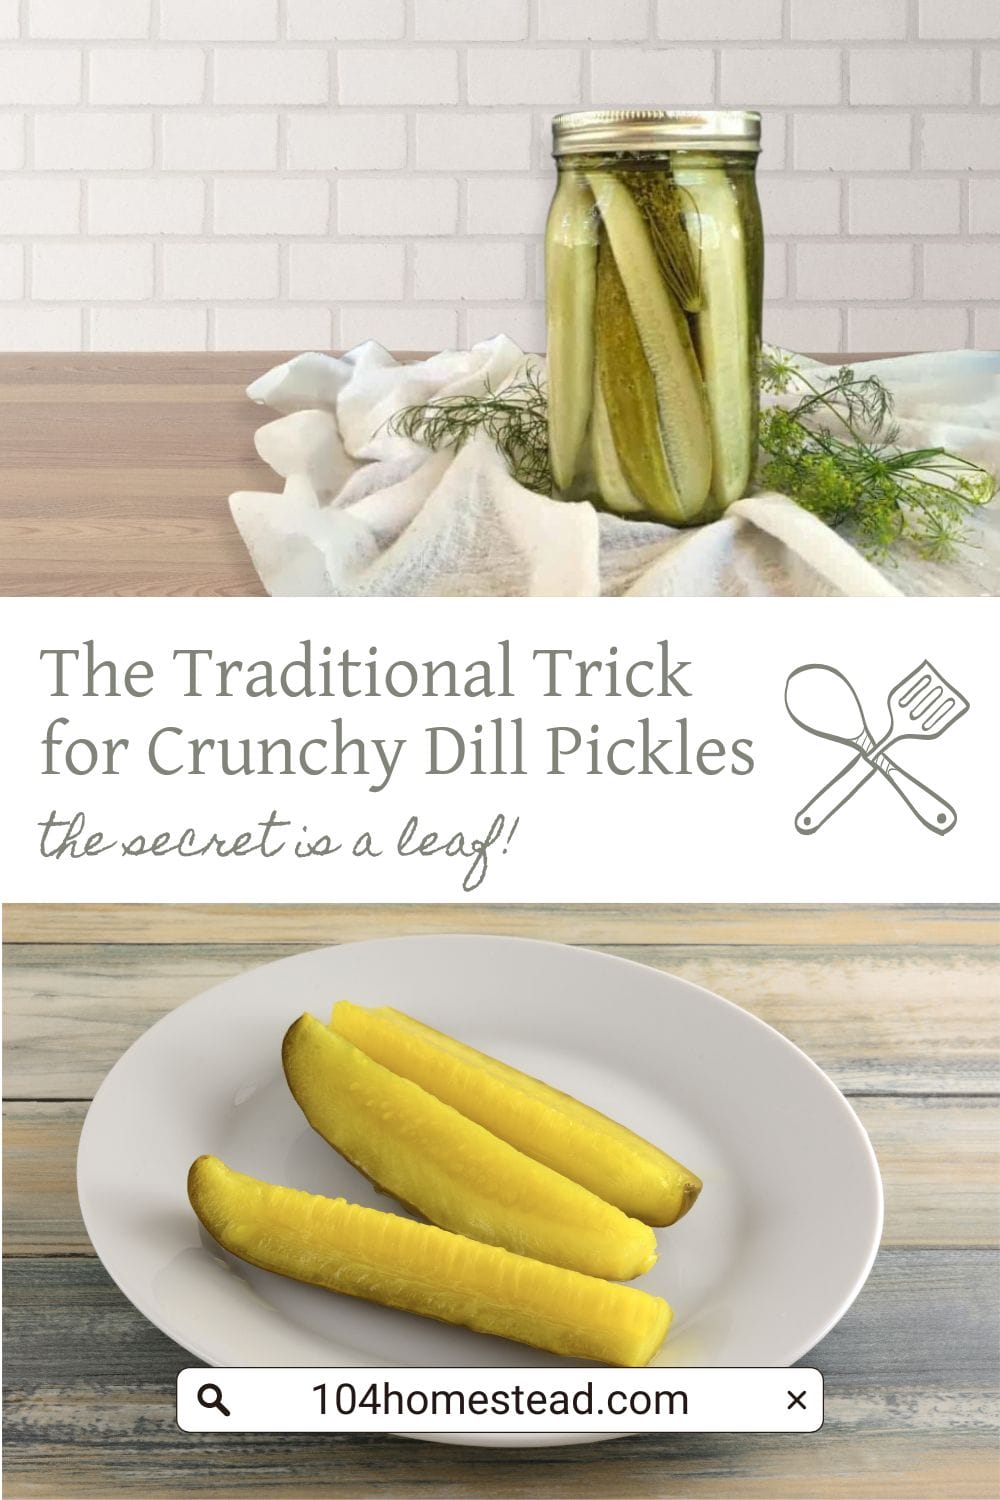 A Pinterest-friendly graphic for my crispy dill pickle recipe.